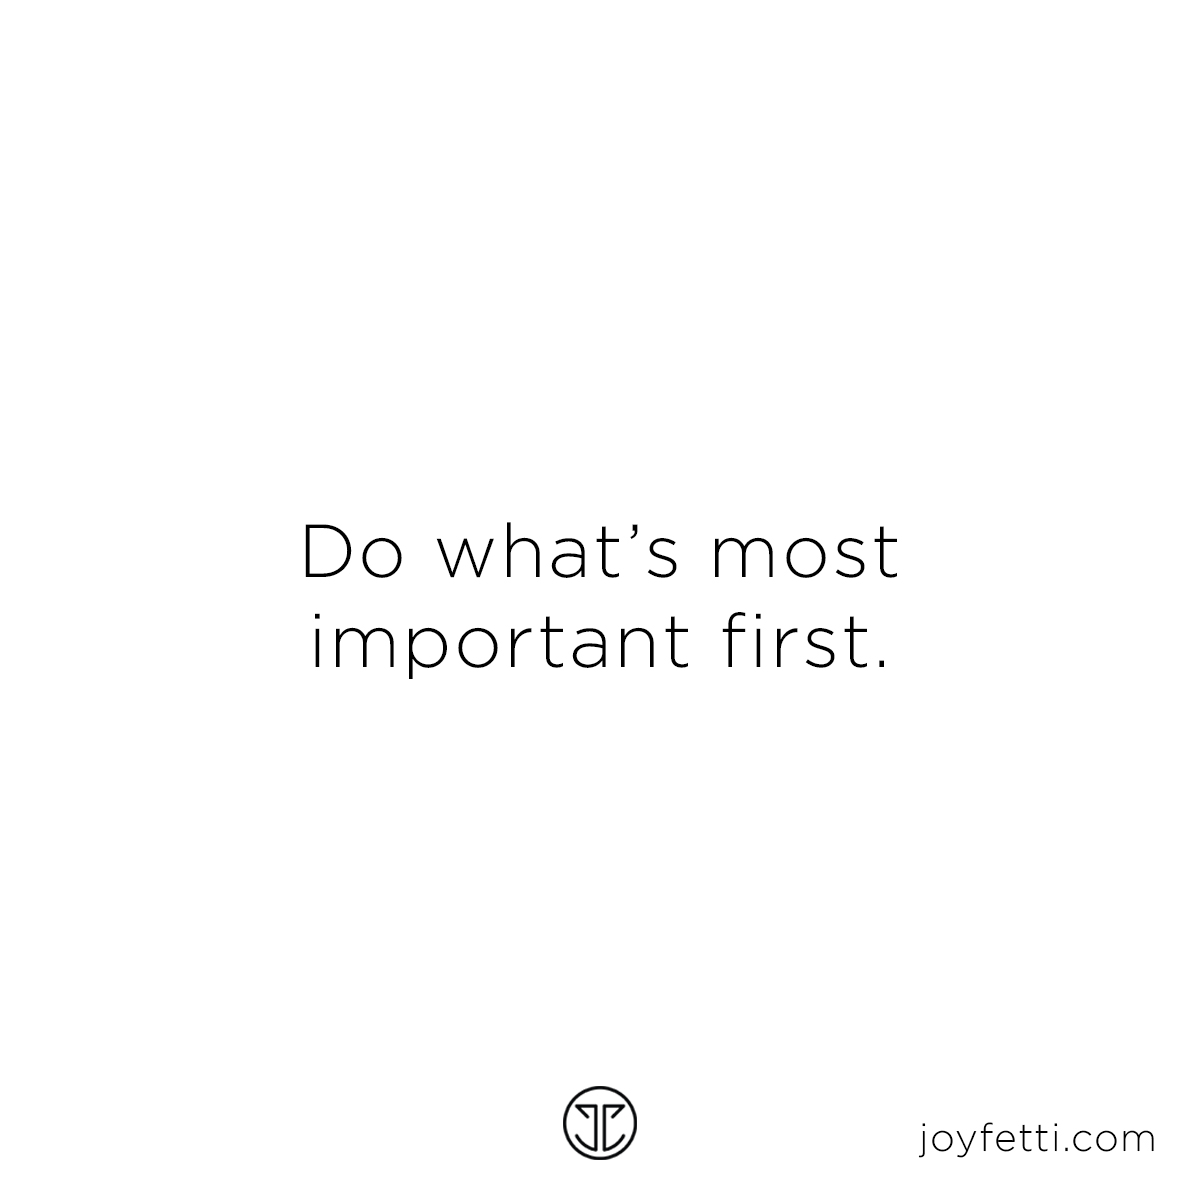 do what's most important first